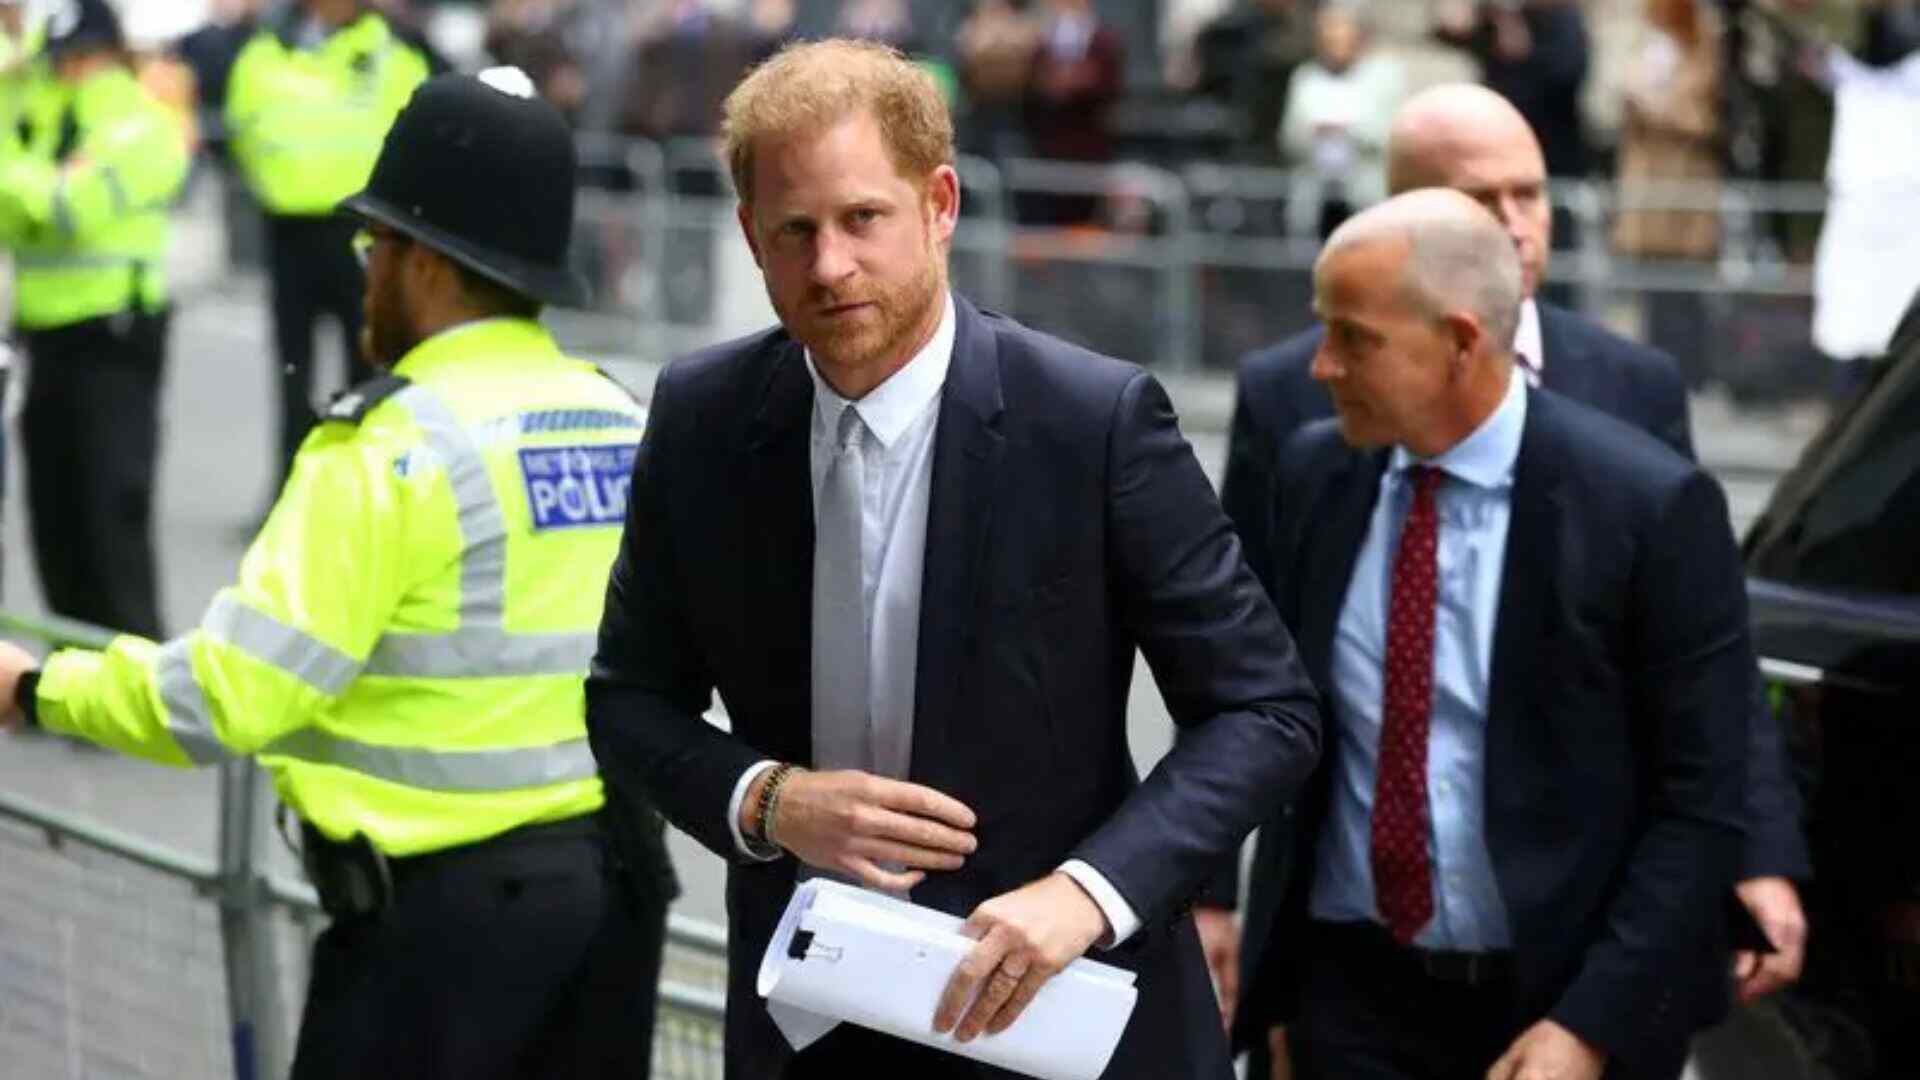 Judge Rejects Special Treatment Appeal For Prince Harry In Security Case